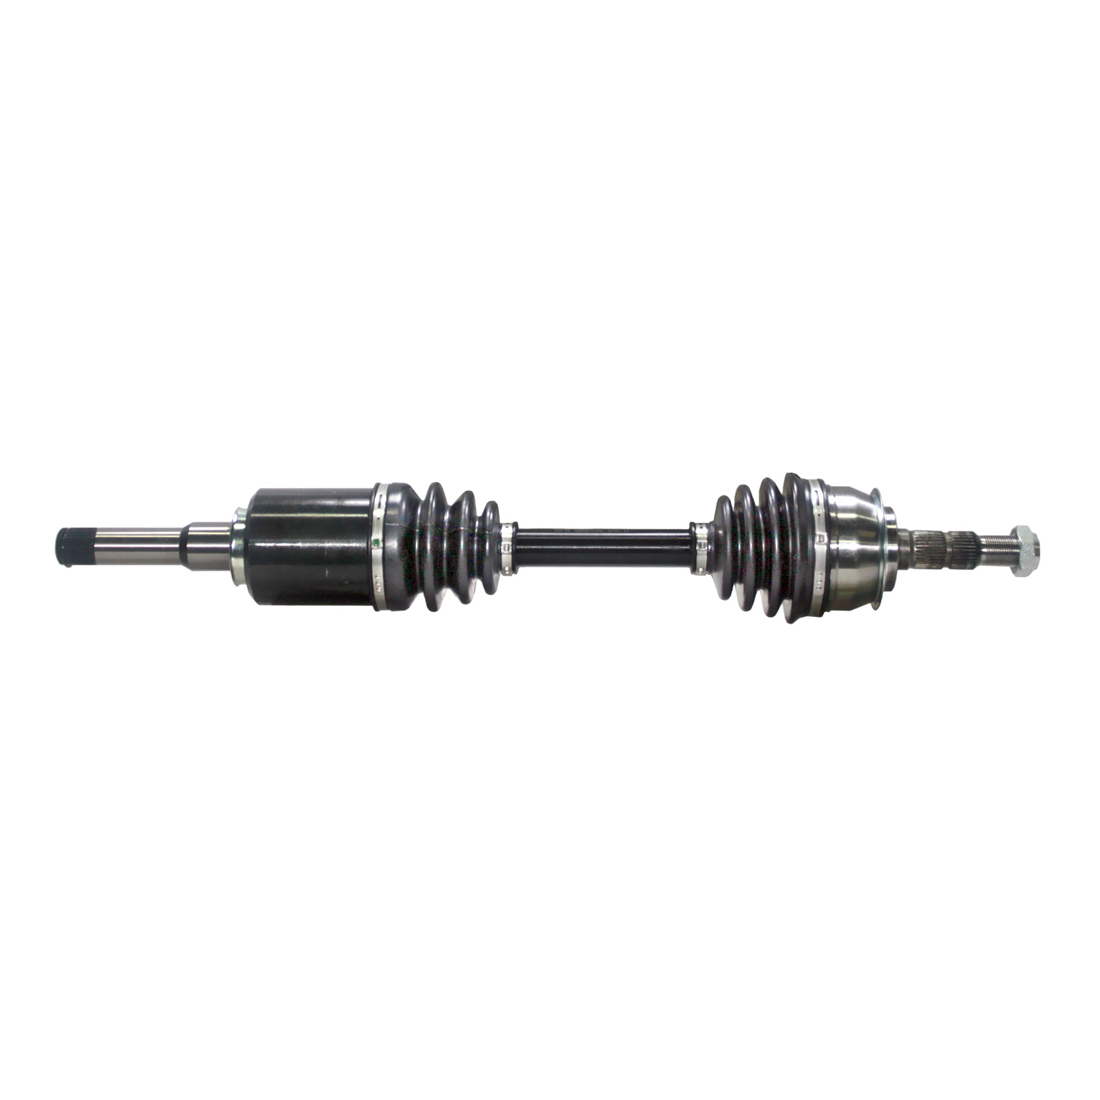  Chevrolet cruze limited drive axle front 